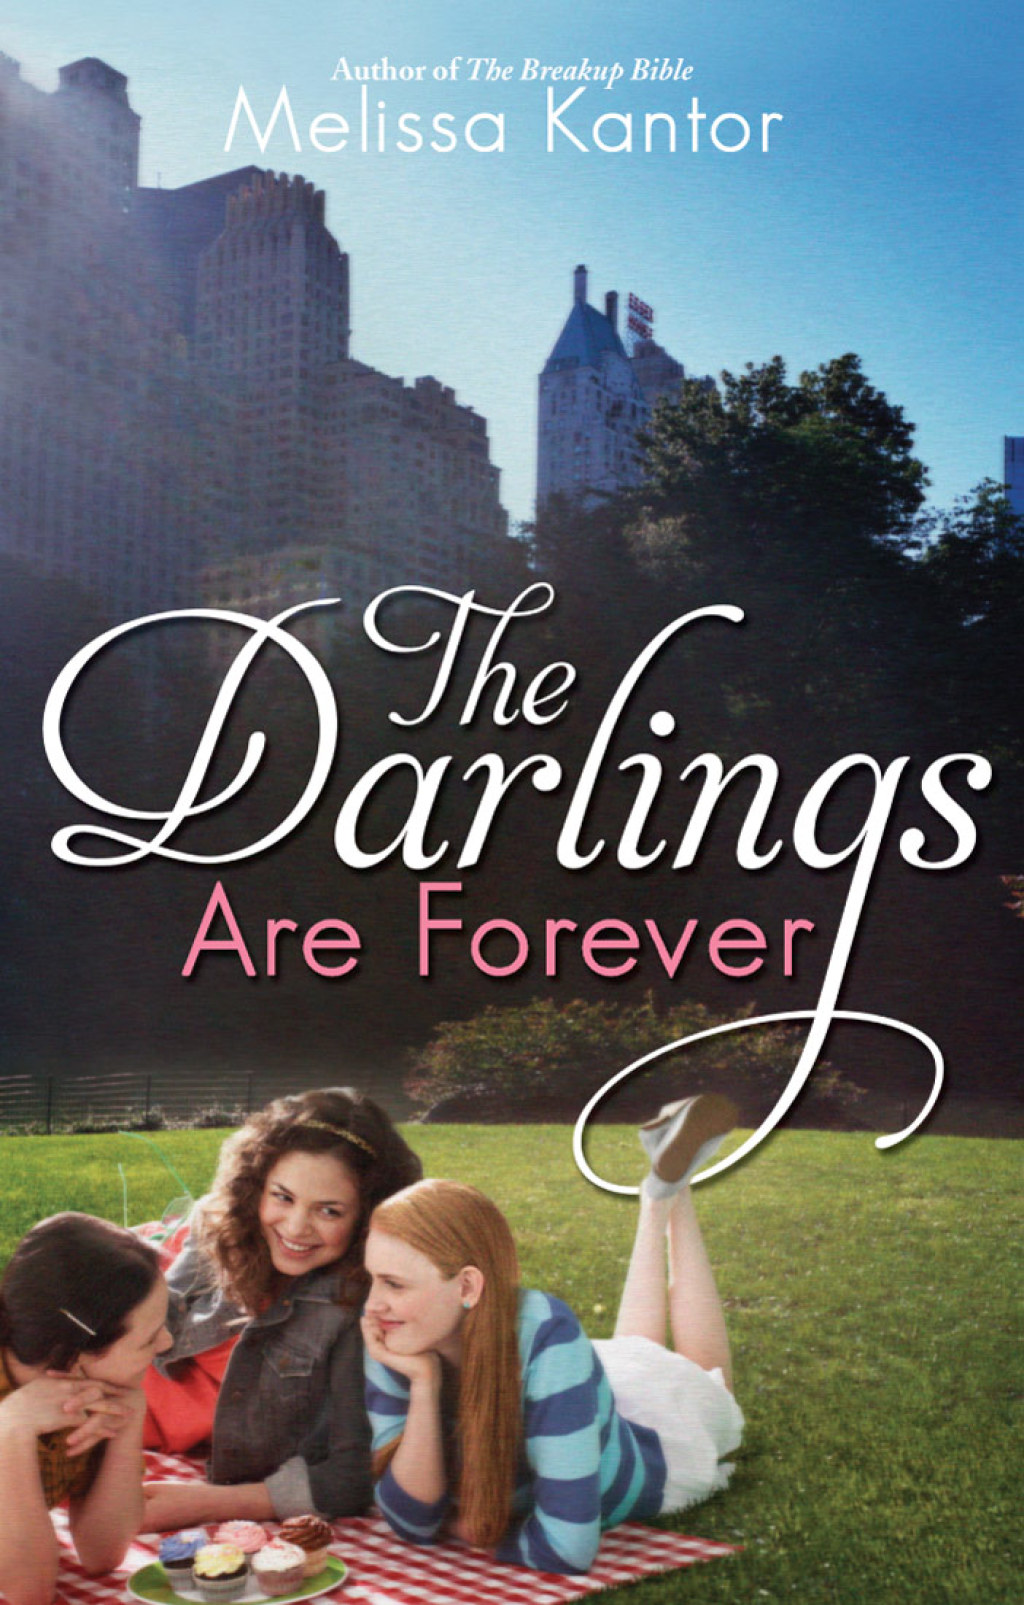 The Darlings Are Forever (eBook) - Melissa Kantor